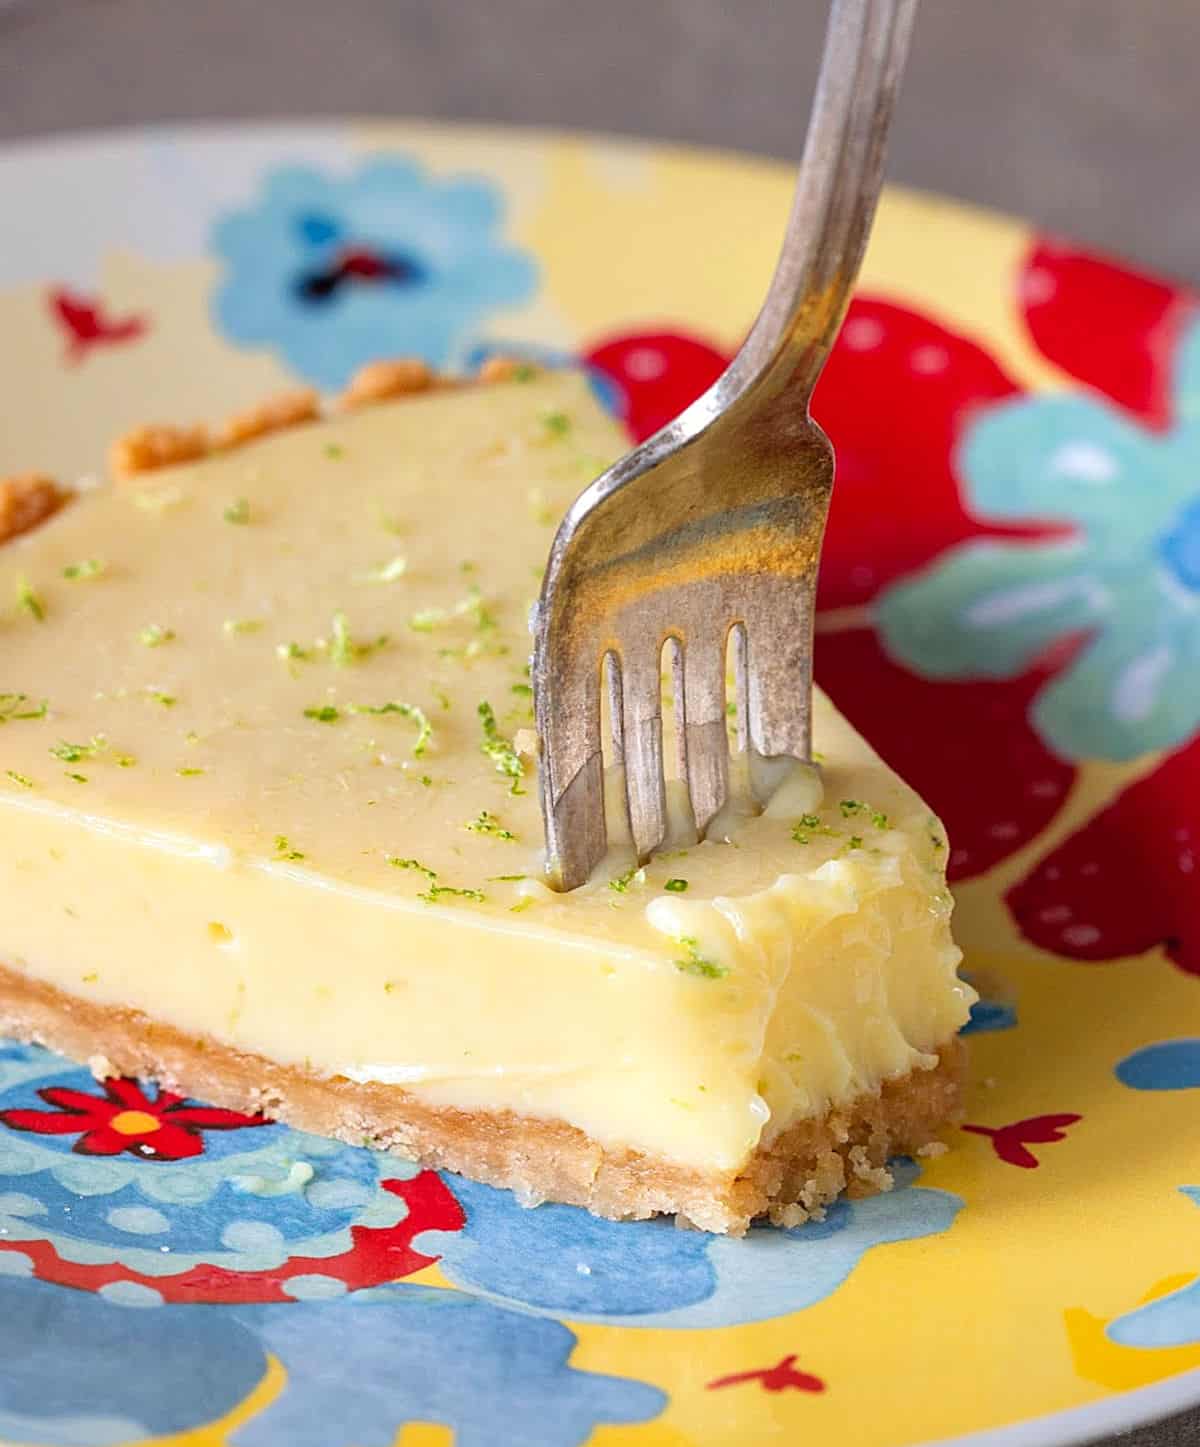 Slice of lime pie and silver fork on a colorful plate.